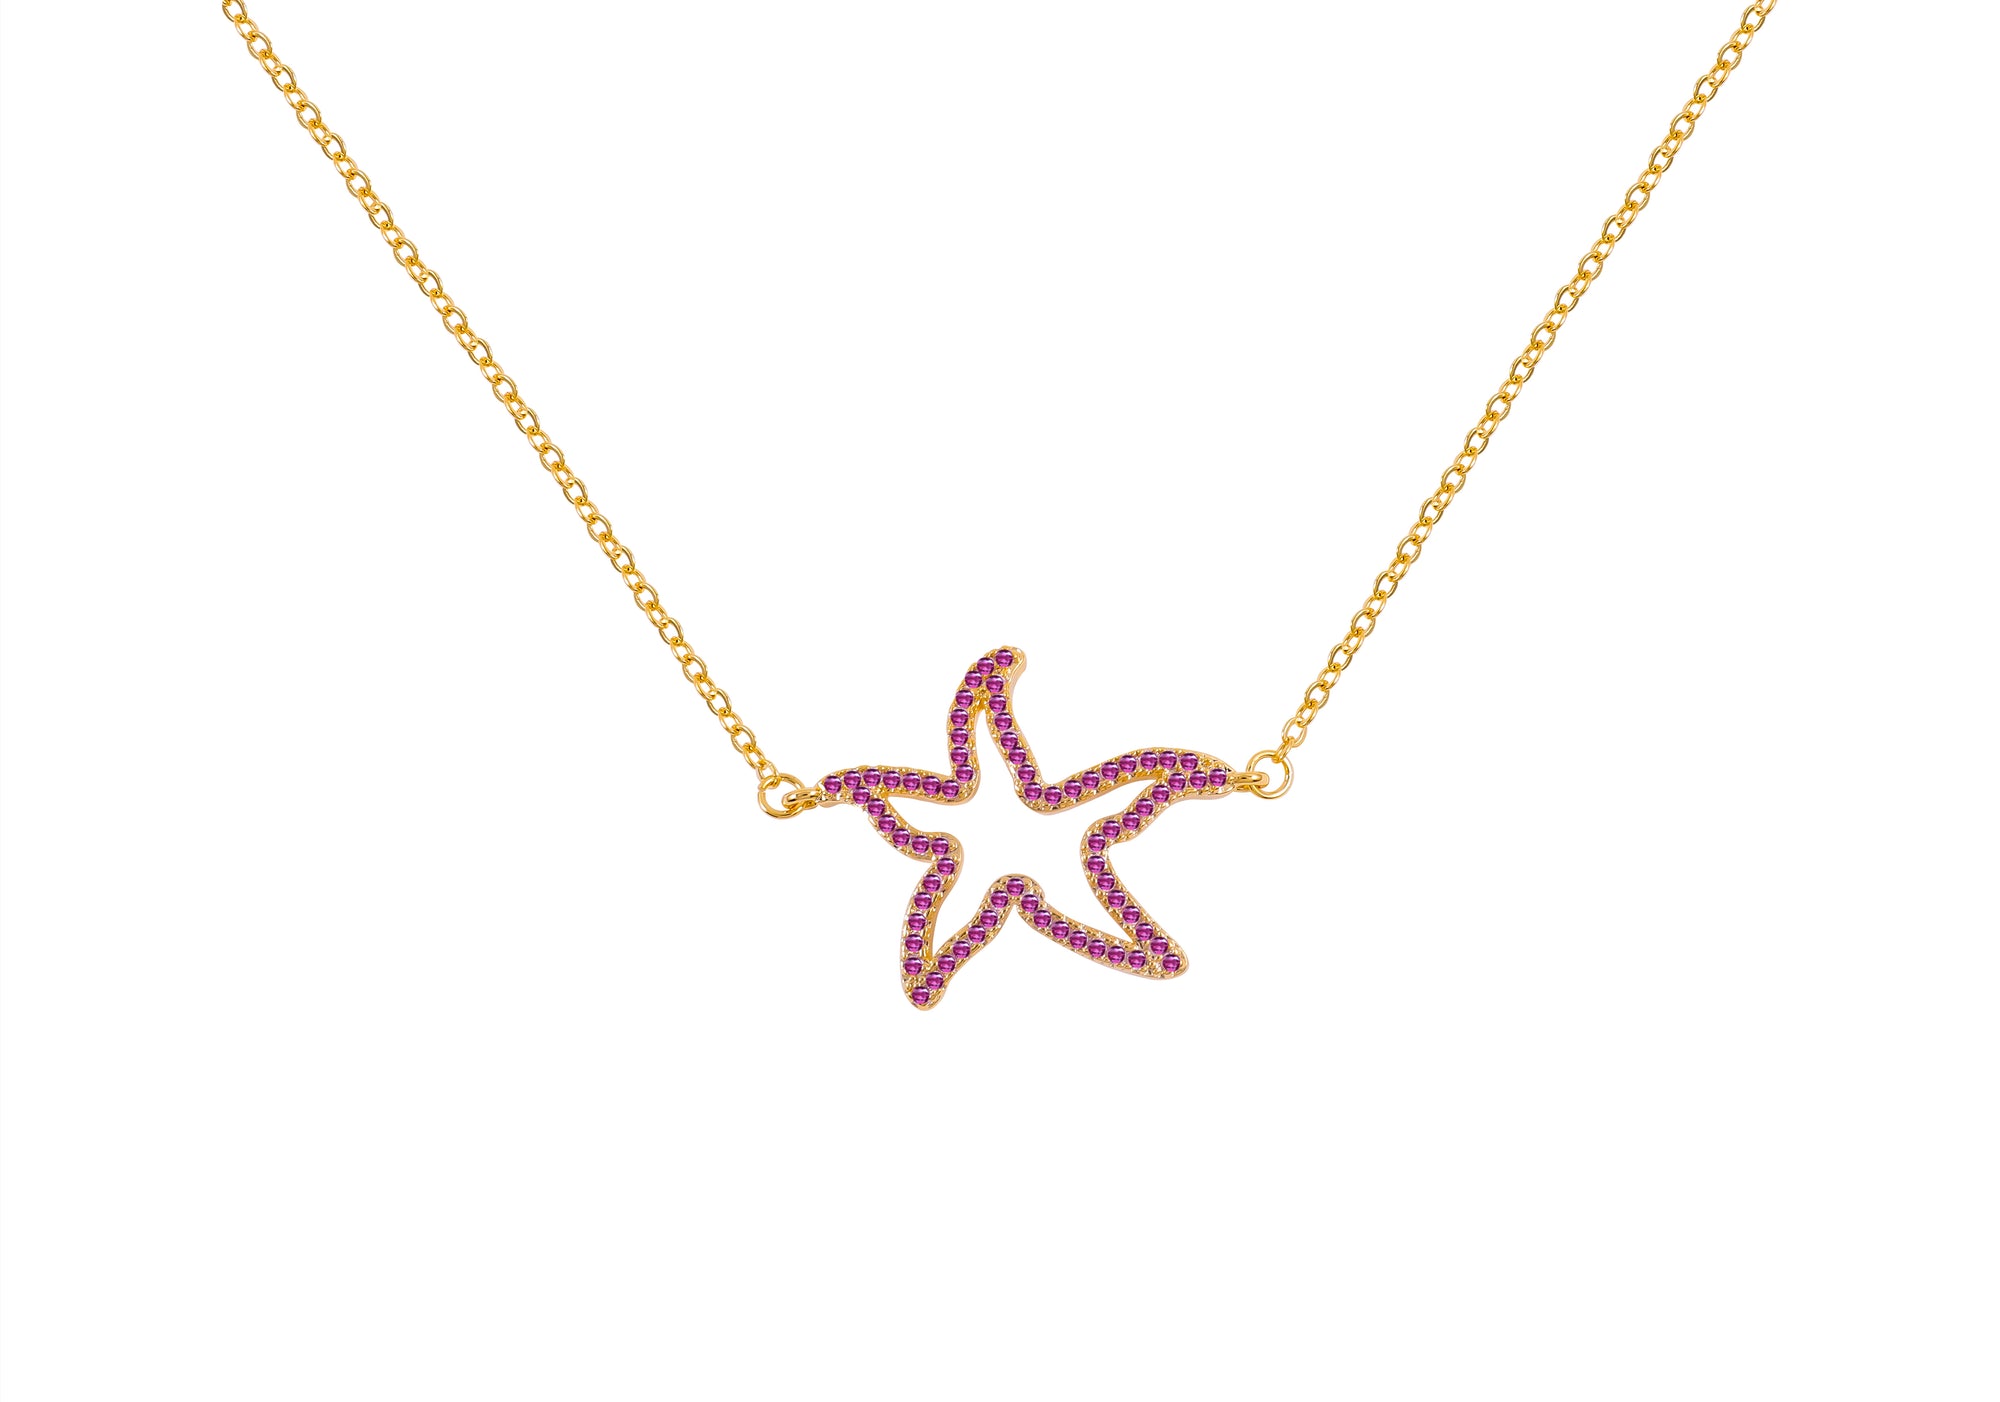 SEA STAR BLING NECKLACE